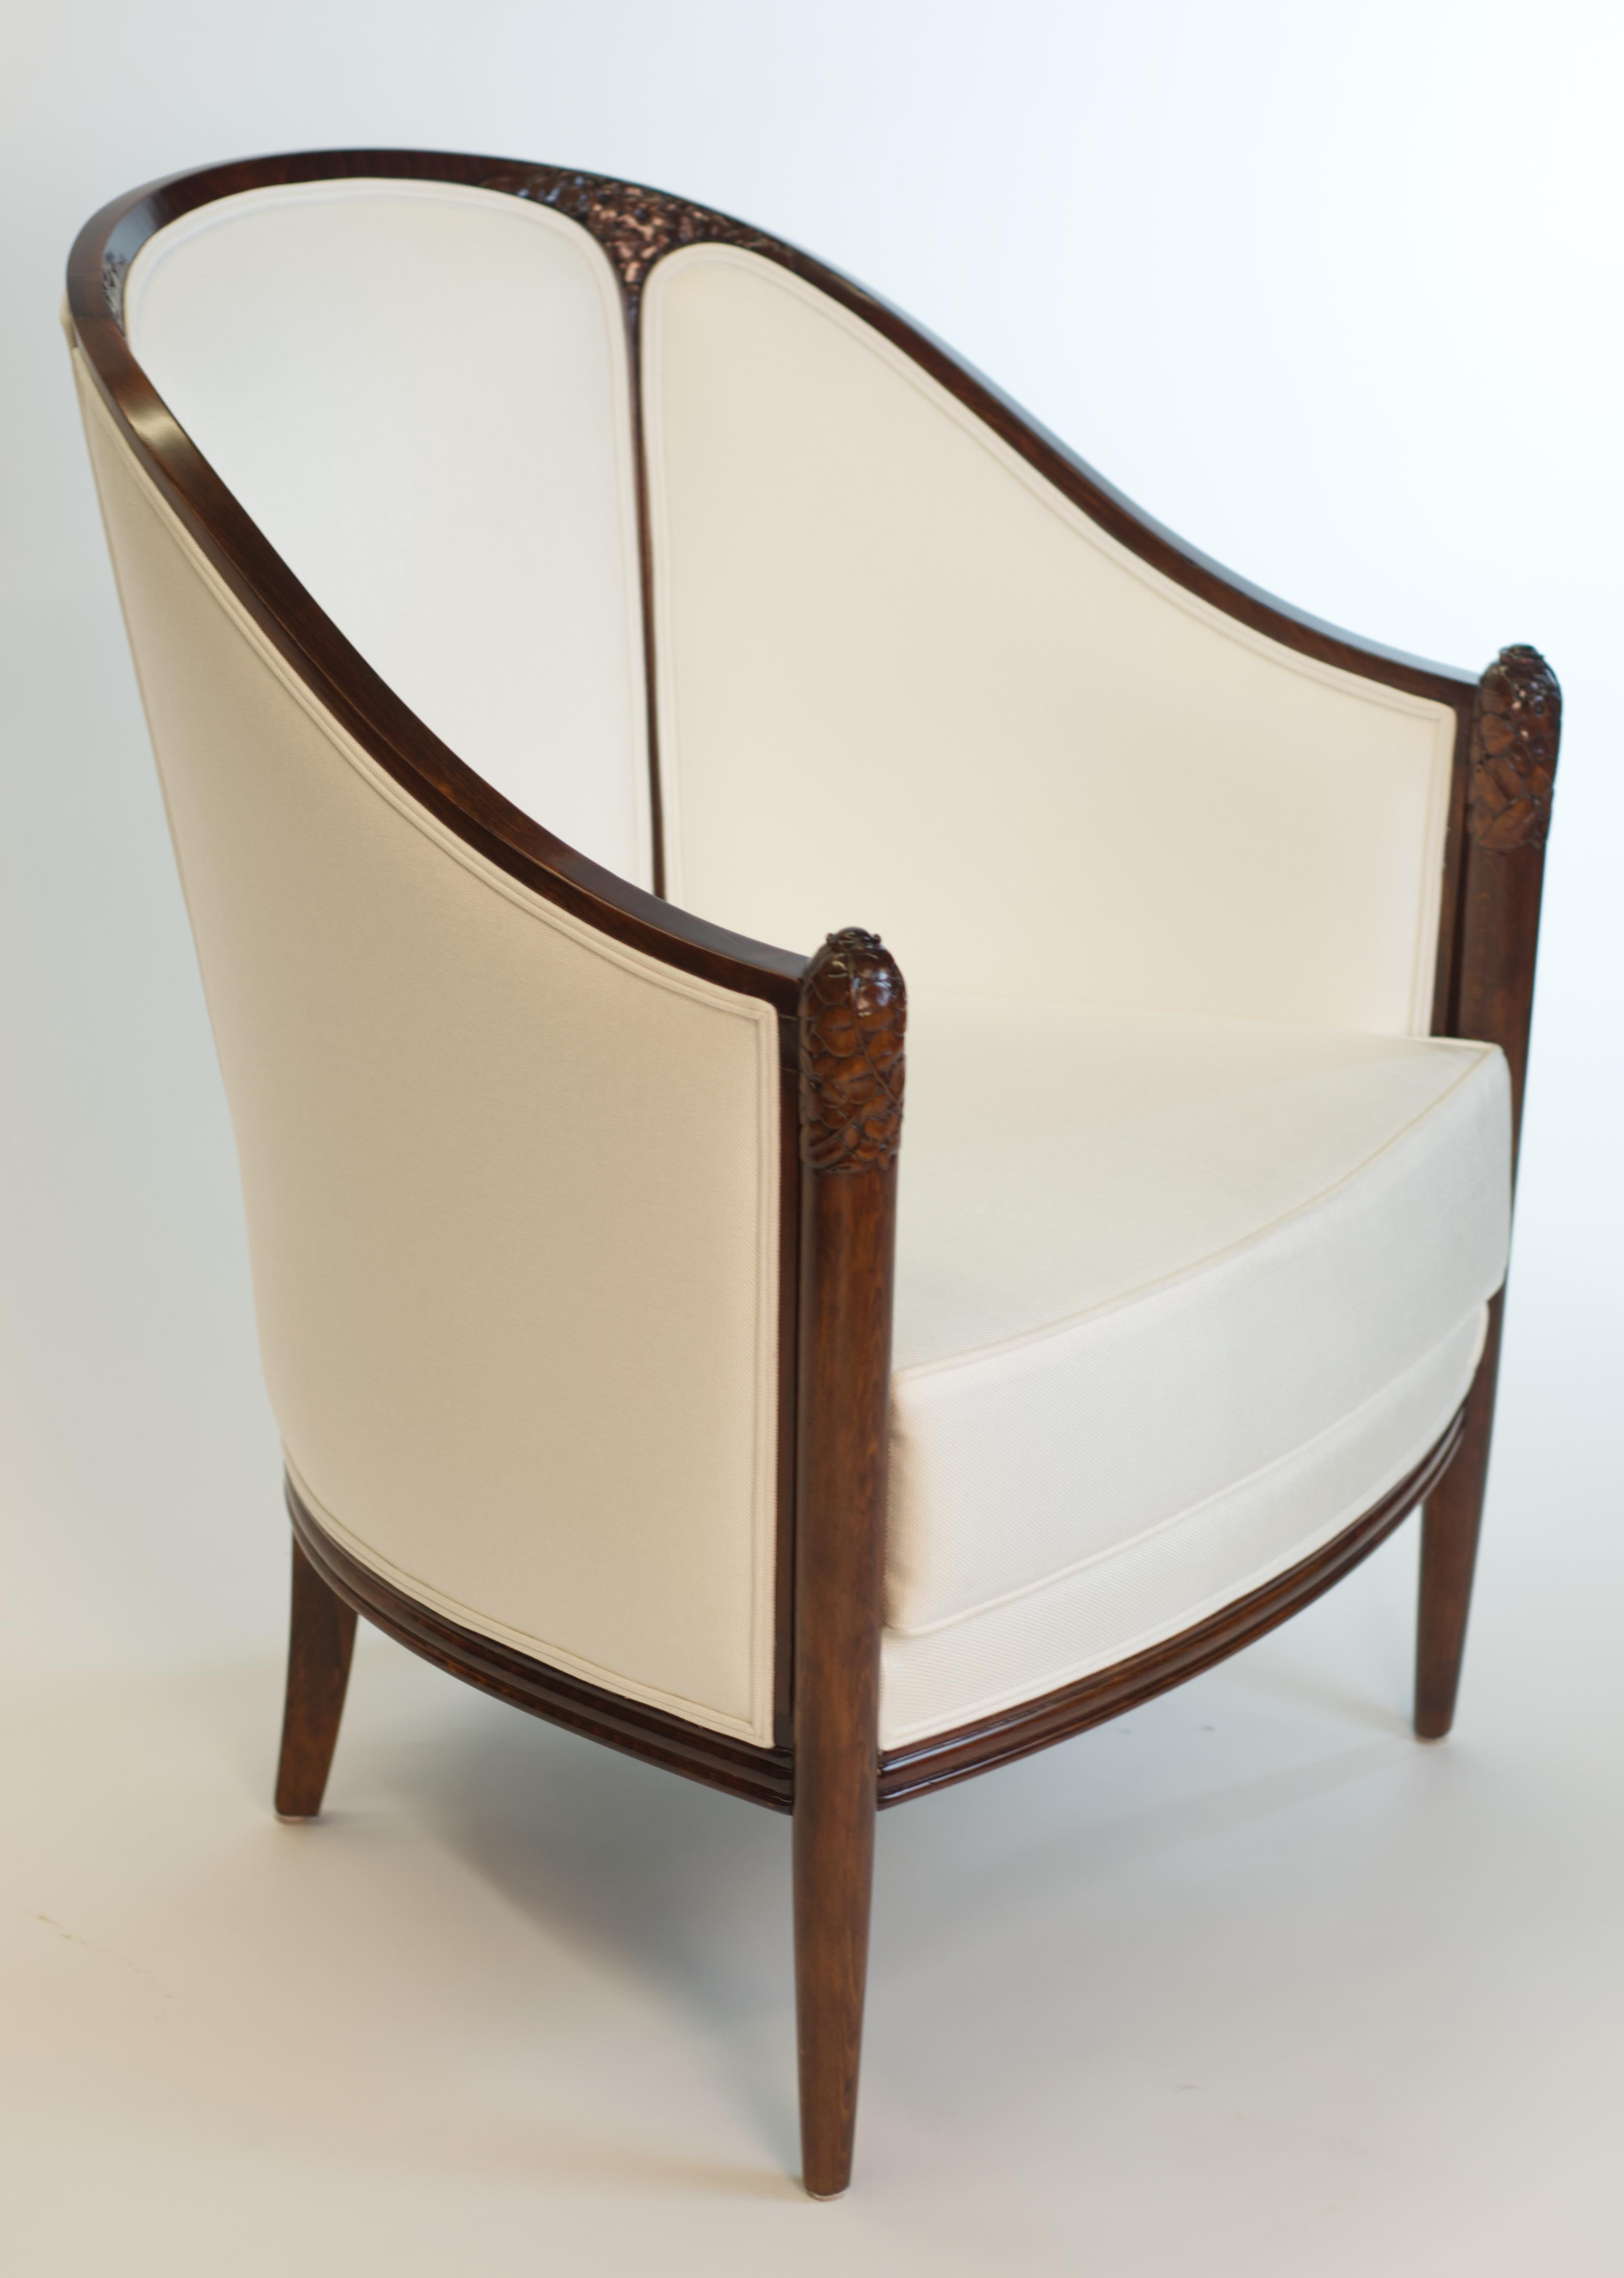 Antique original Fine Art Deco Bergère by A. Bicchierini was professionally restored, lacquered, and reupholstered. Original upholstery sticker is included in the sale.

About the Restorer: 

Roman Erlikh is a professional woodworker with over 20